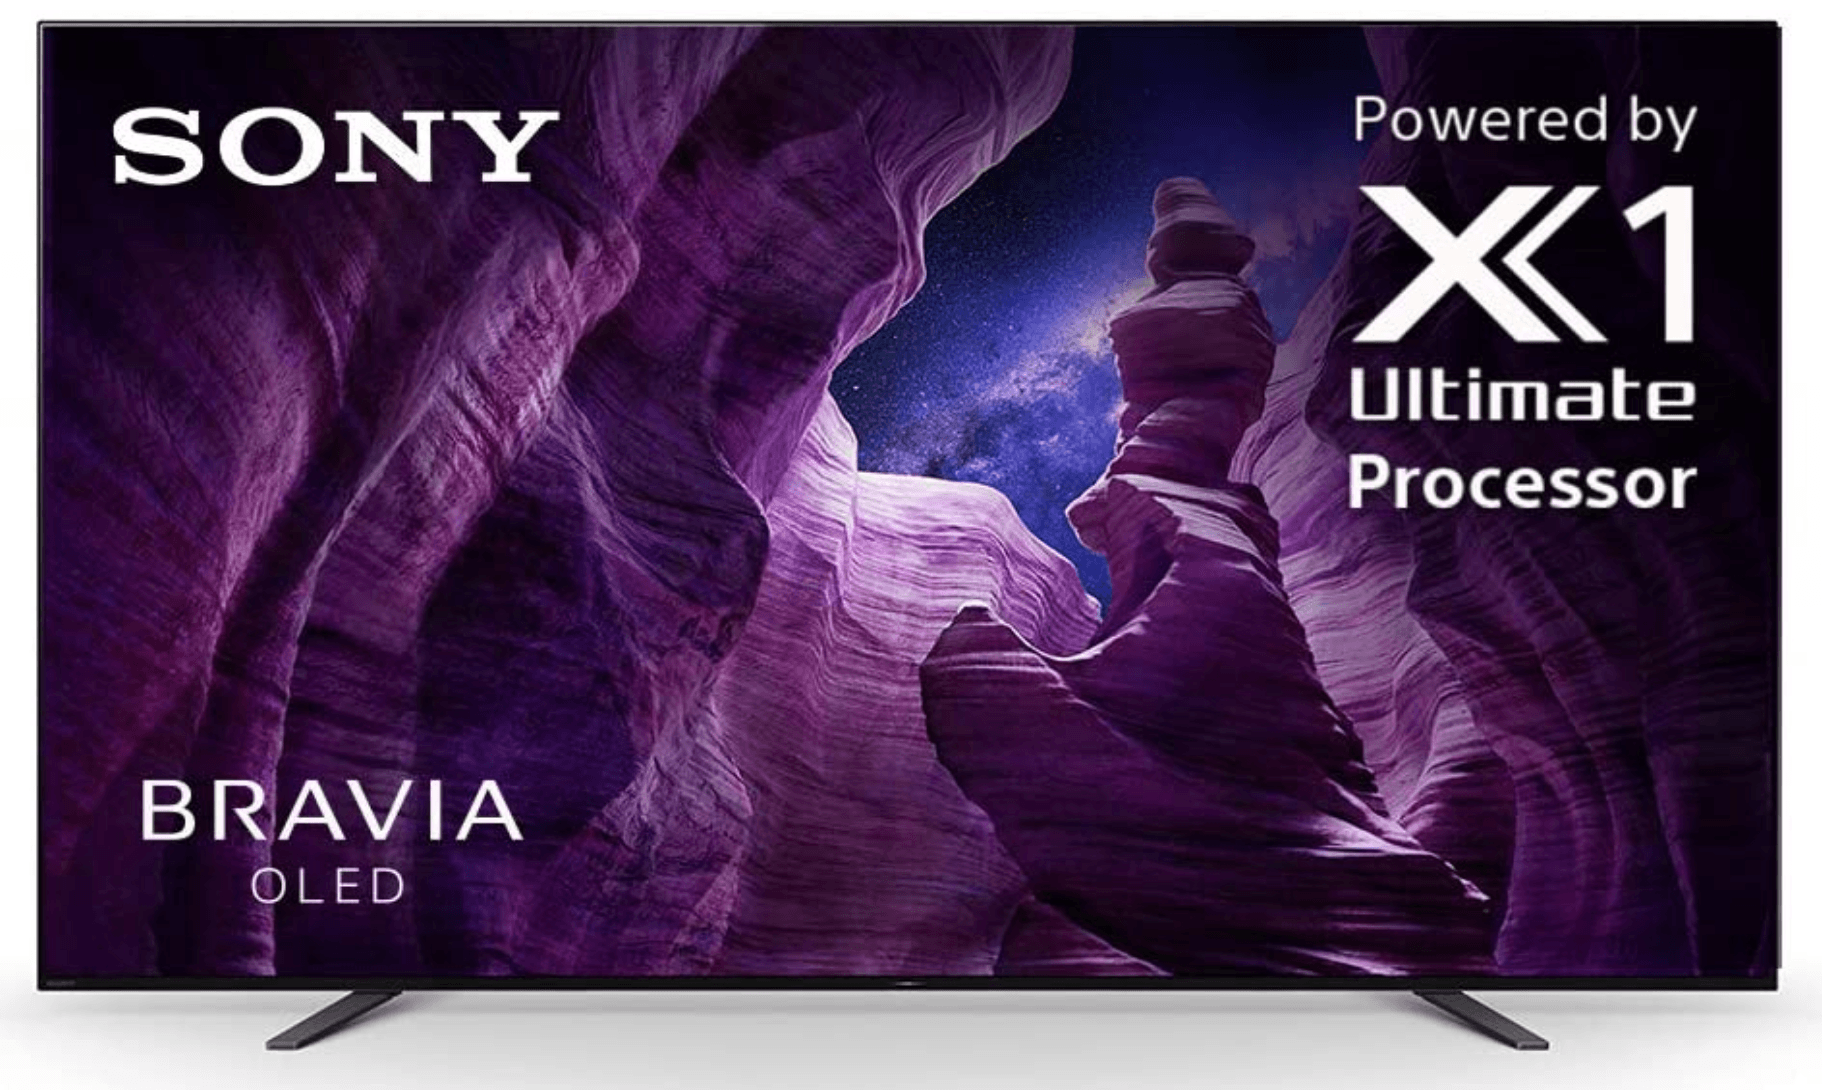 Multiple 4K TVs on Sale During Prime Day, Including Sony OLEDs